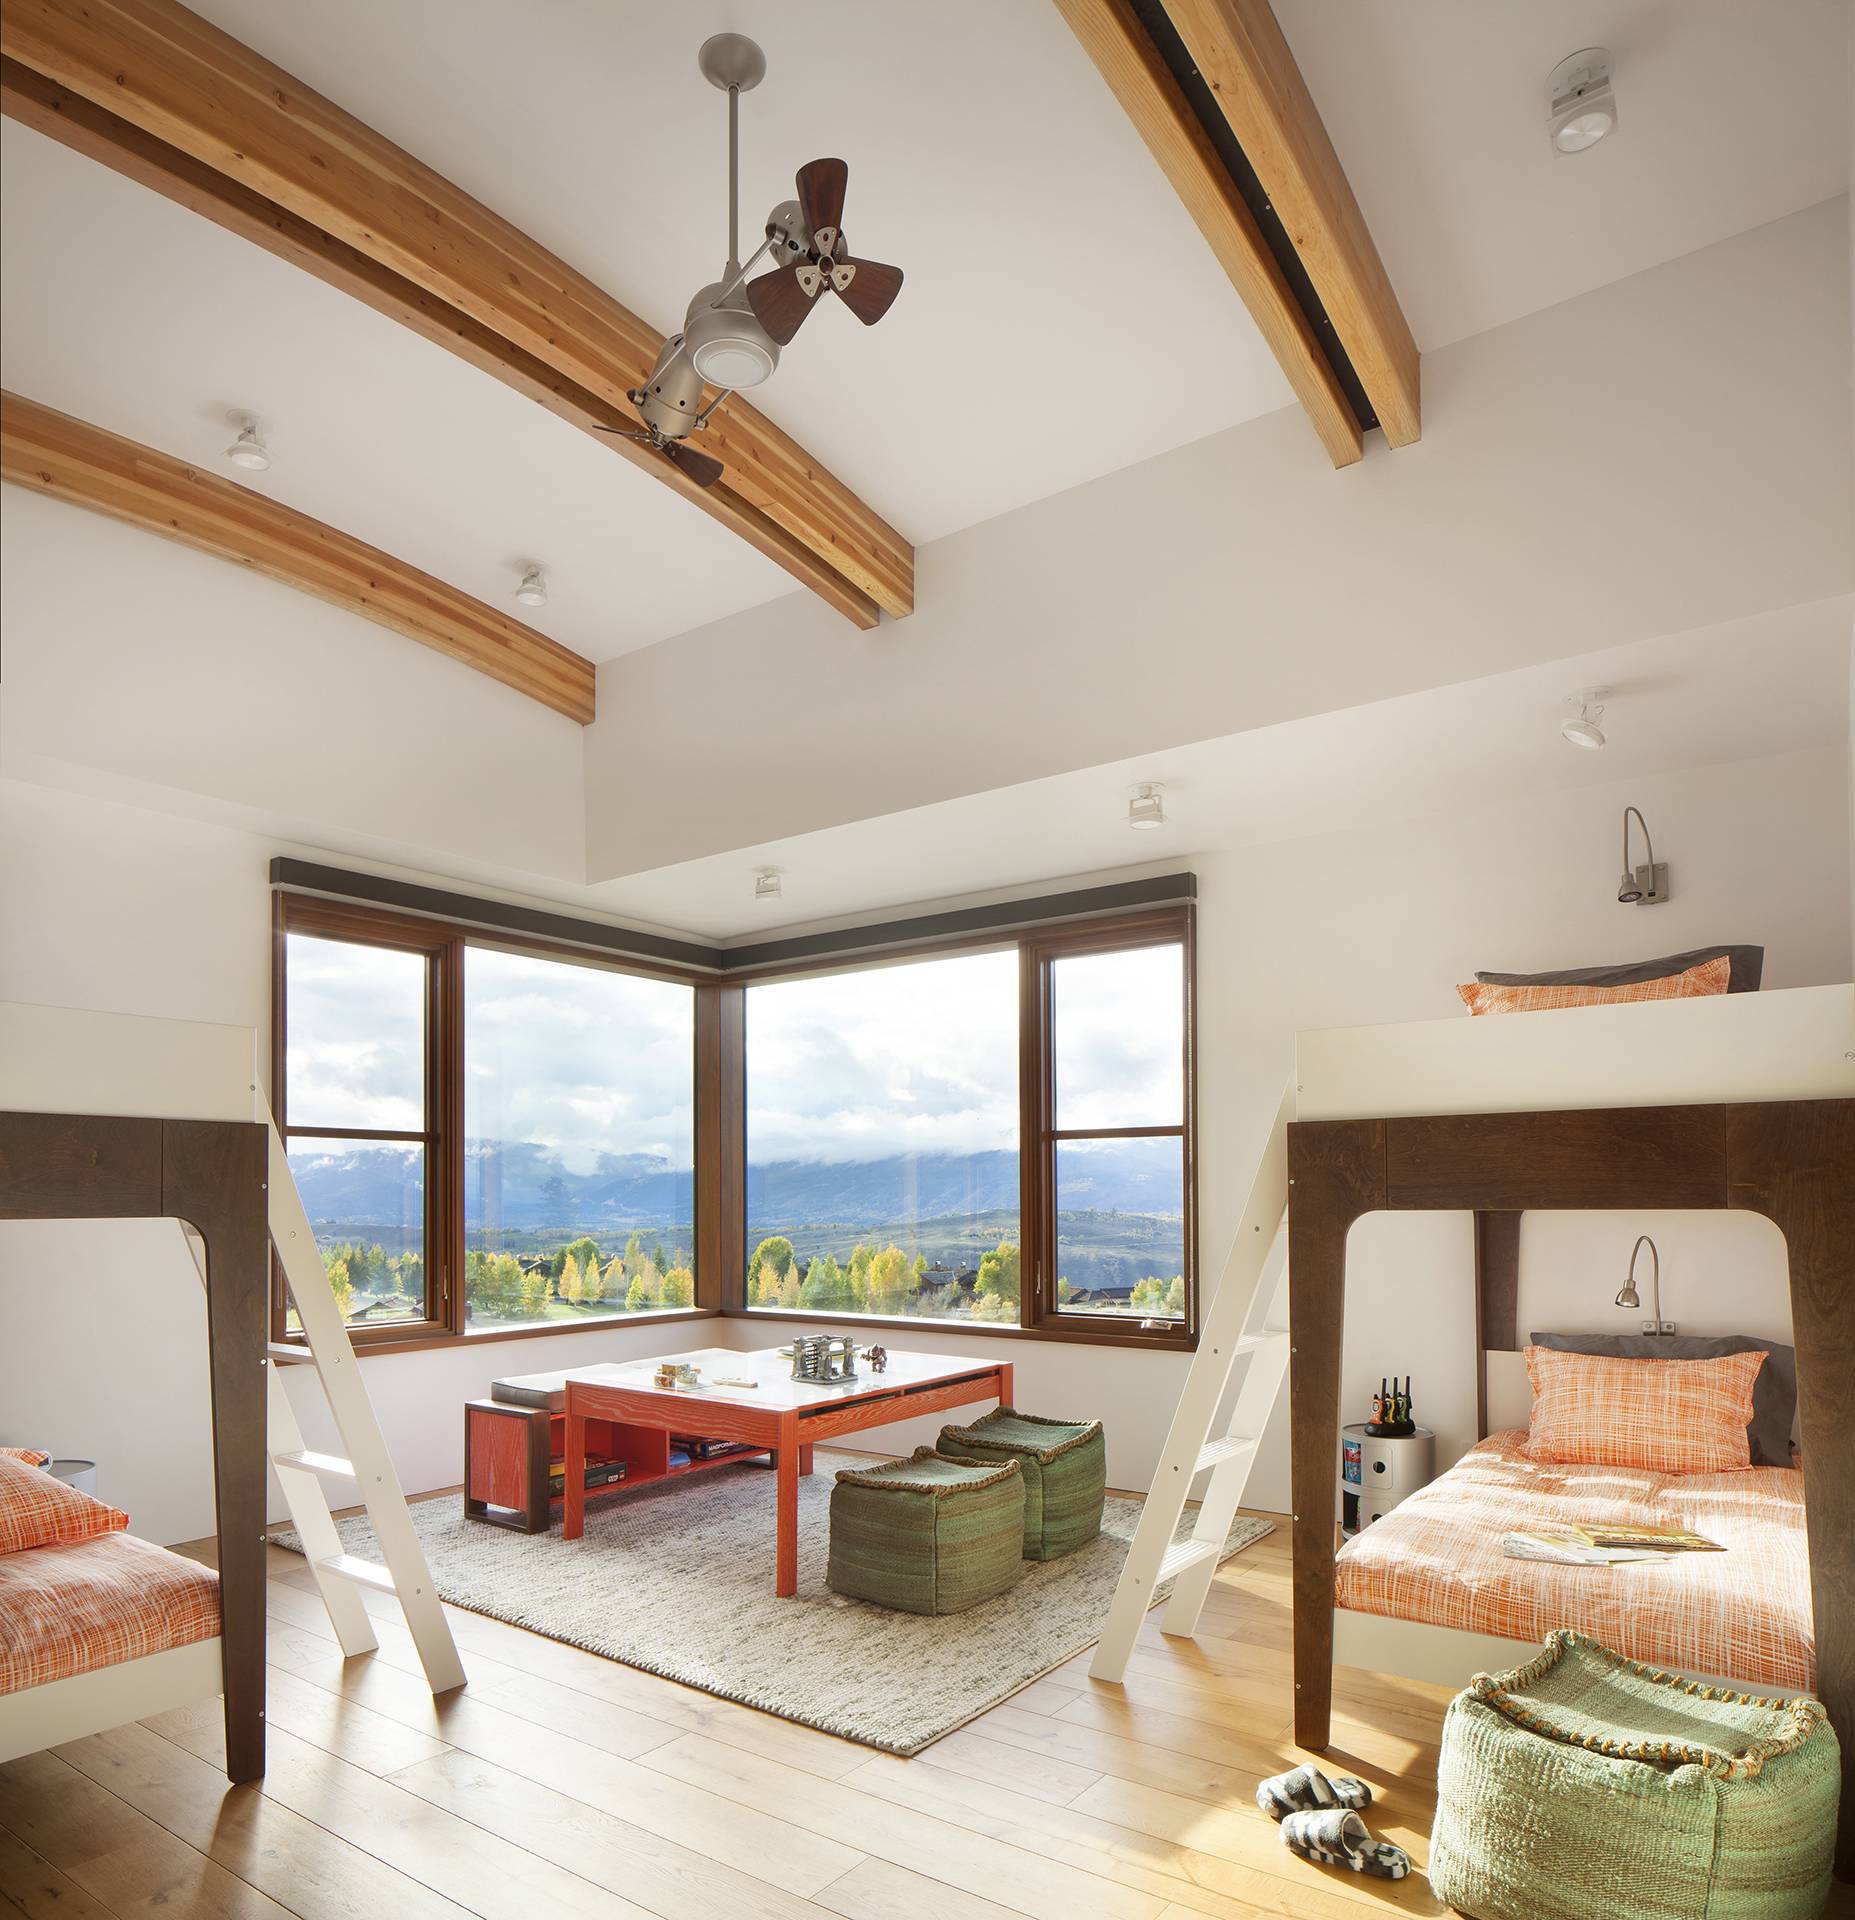 wooden beams on ceiling of large bedroom with bay windows and multiple sets of bunkbeds